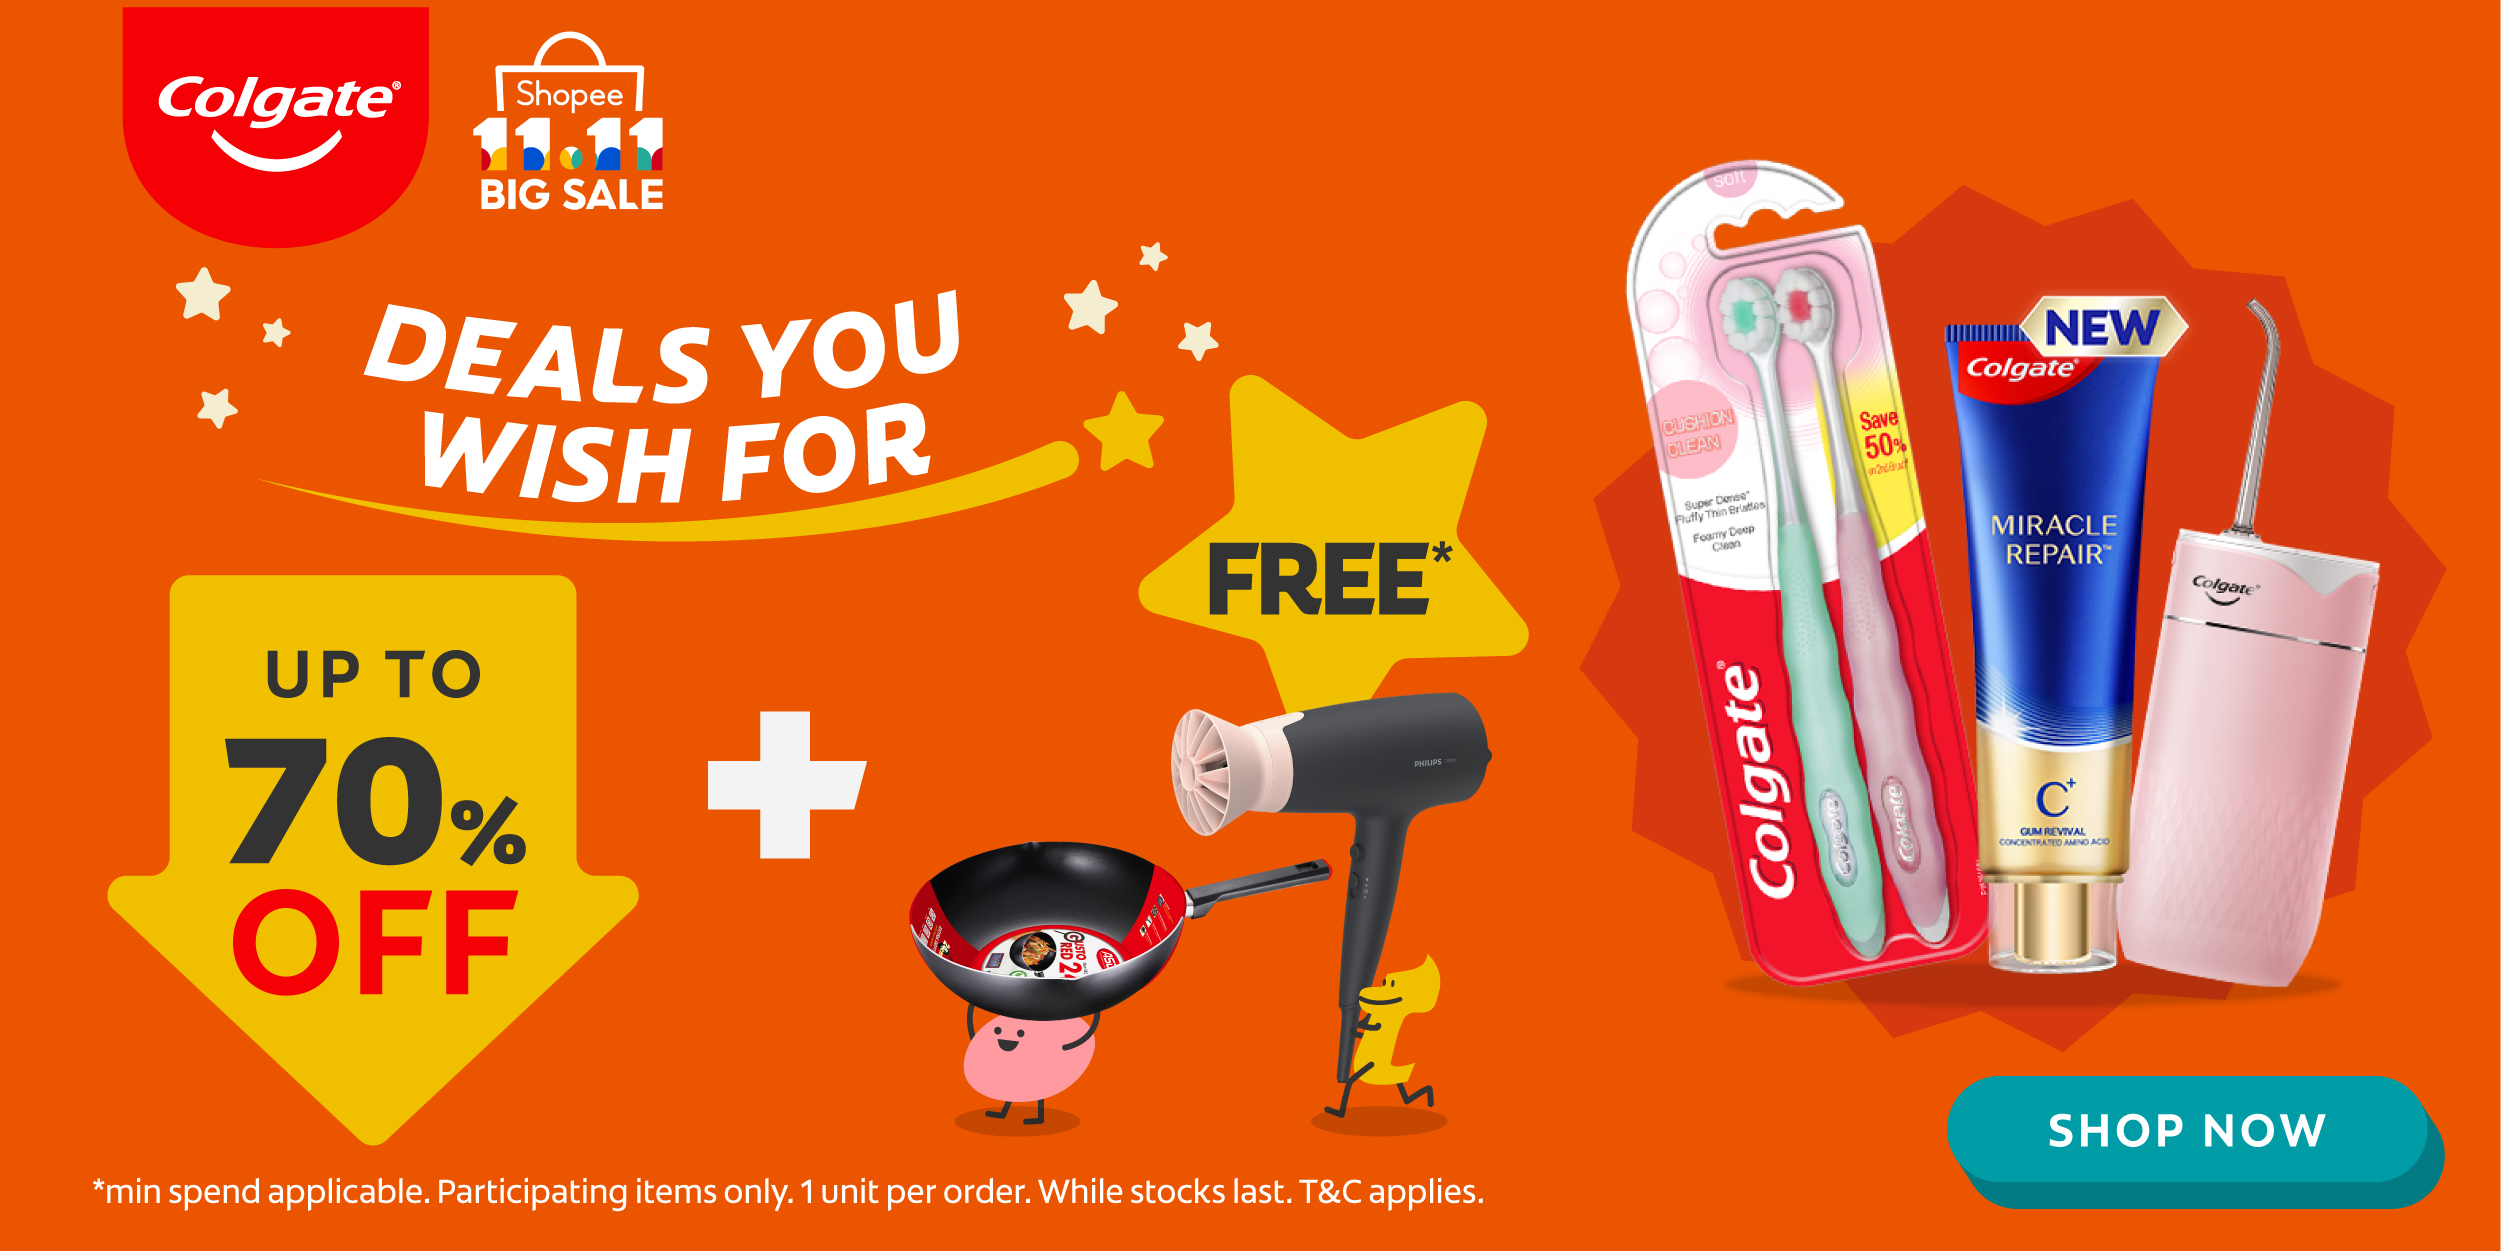 Sm11e with Colgate this 11.11! Deals up to 70% + extra $16* off voucher + FREE Gifts on 11 Nov!